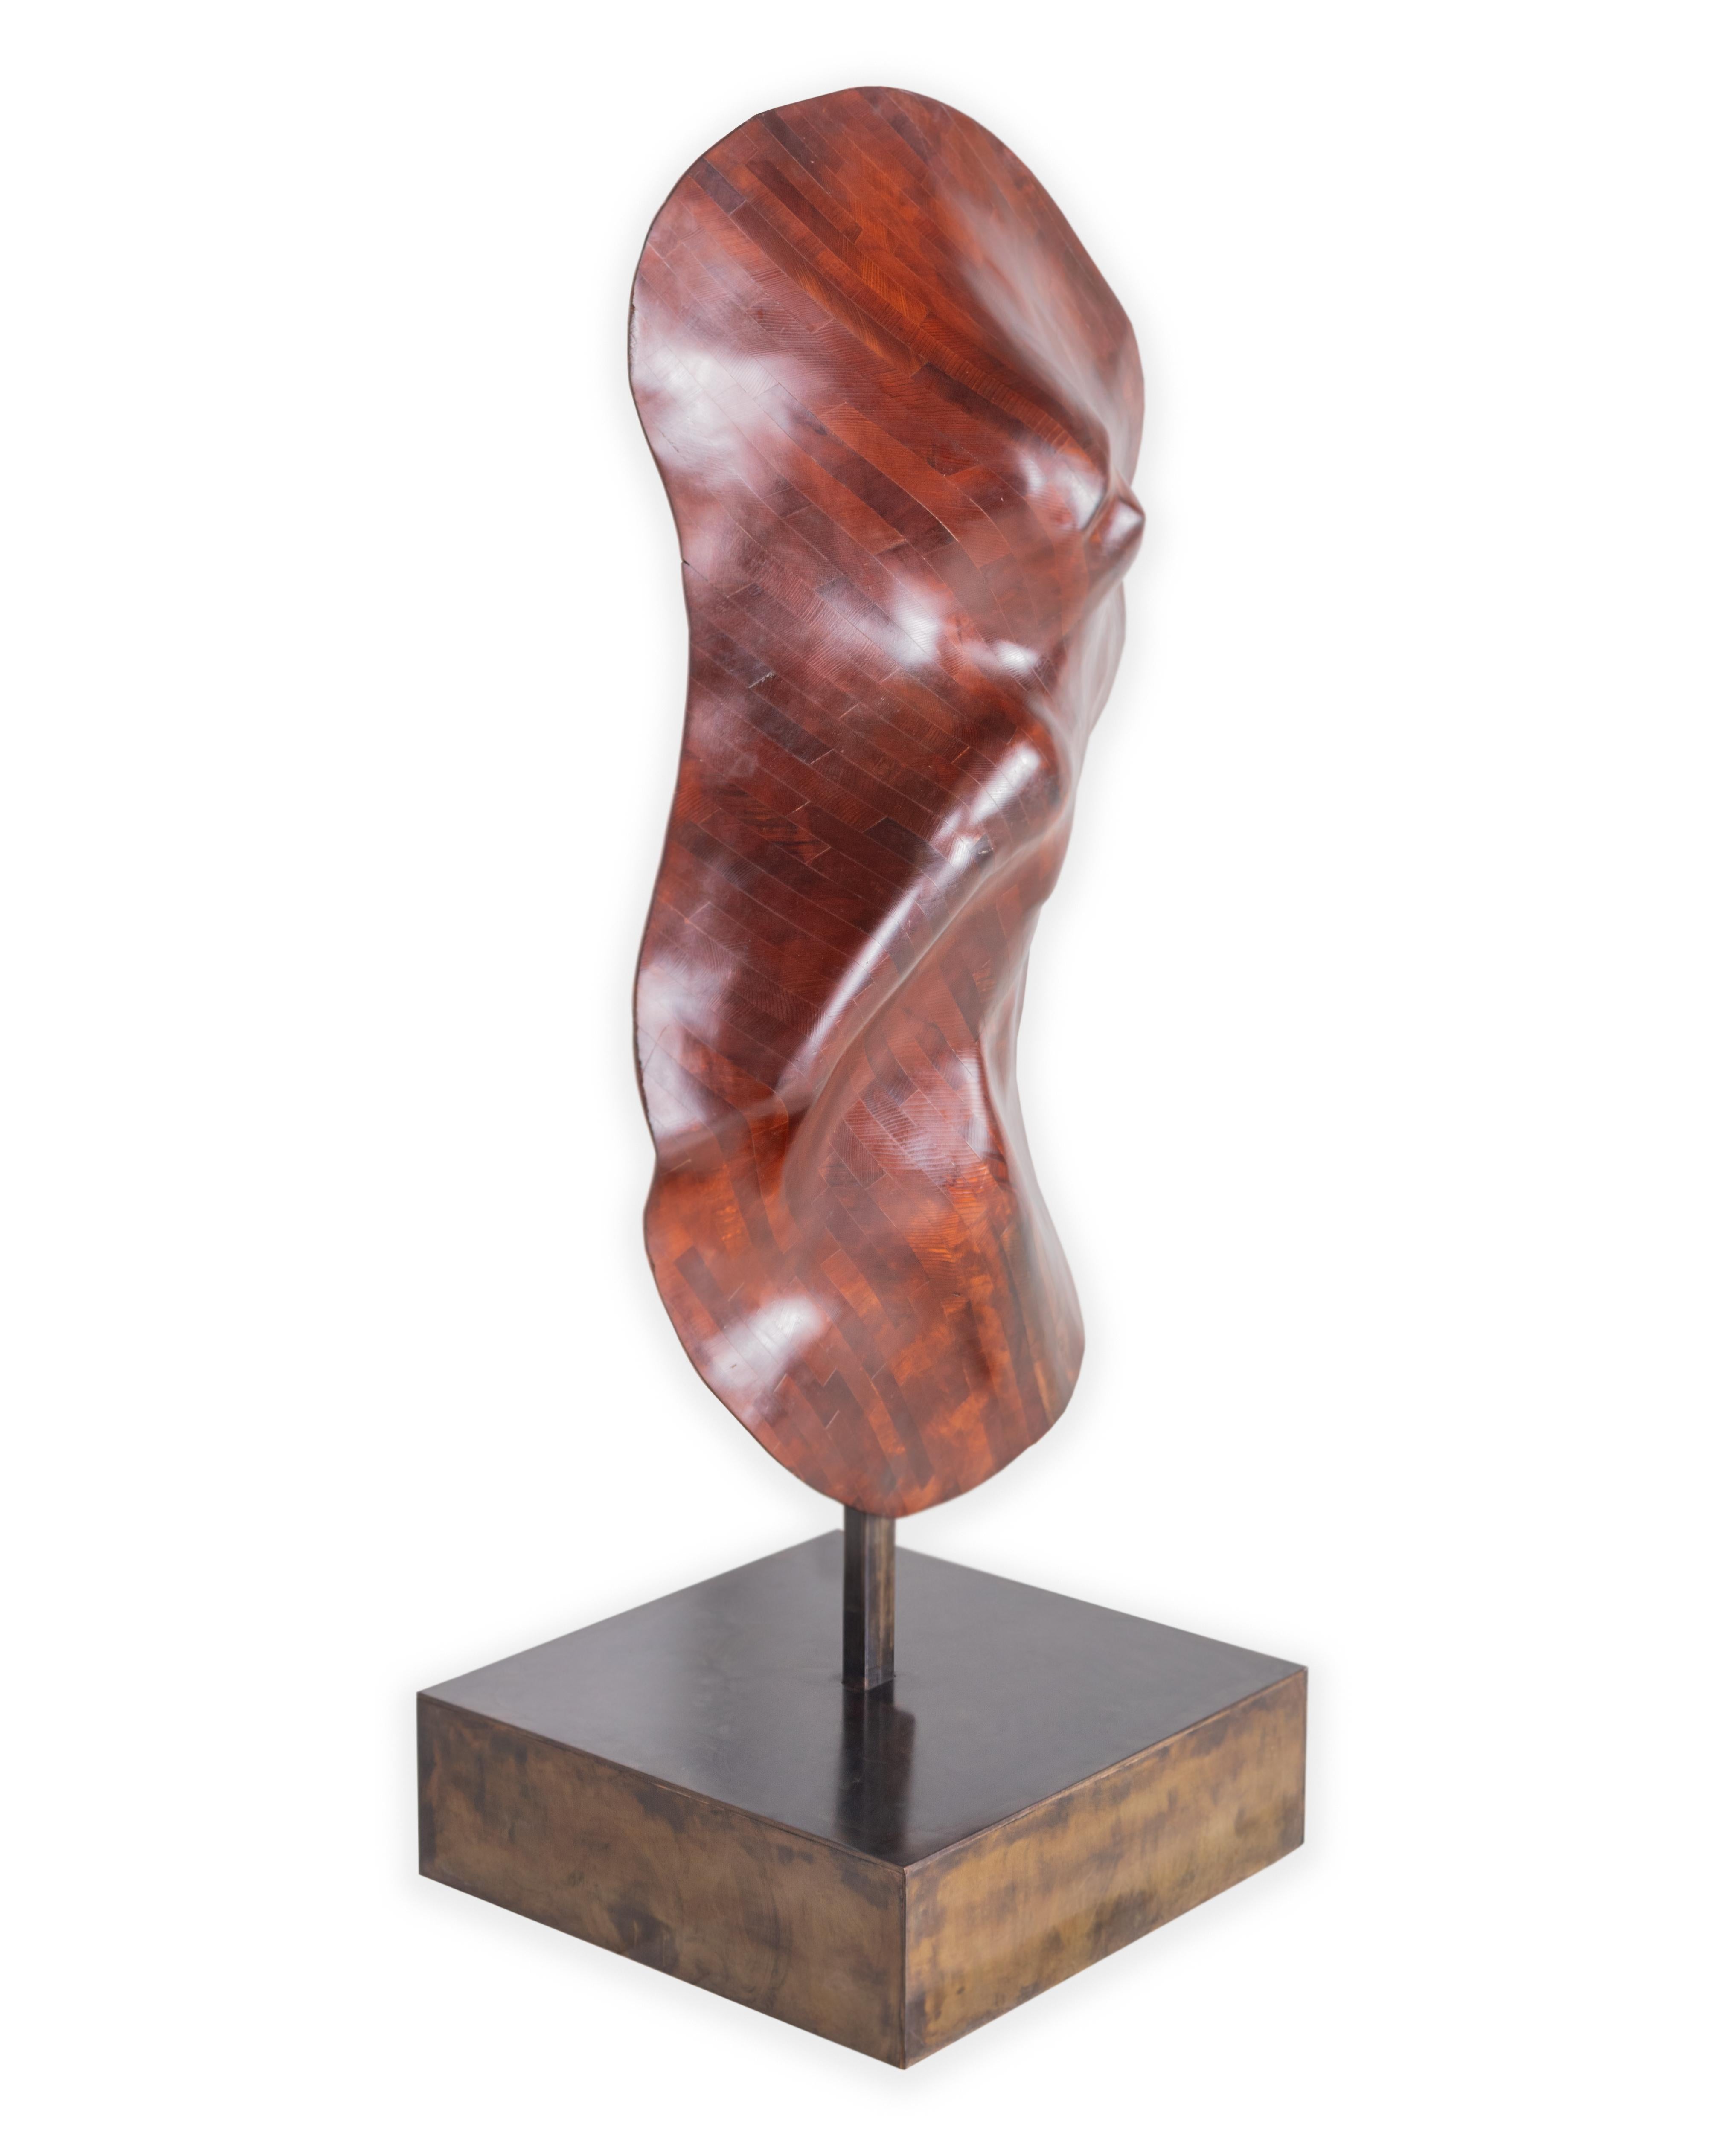 Wood sculpture mounted on custom metal stand. In my organic, contemporary, vintage and mid-century modern style.

Curated for our one of a kind line, Le Monde. Exclusive to Brendan Bass.